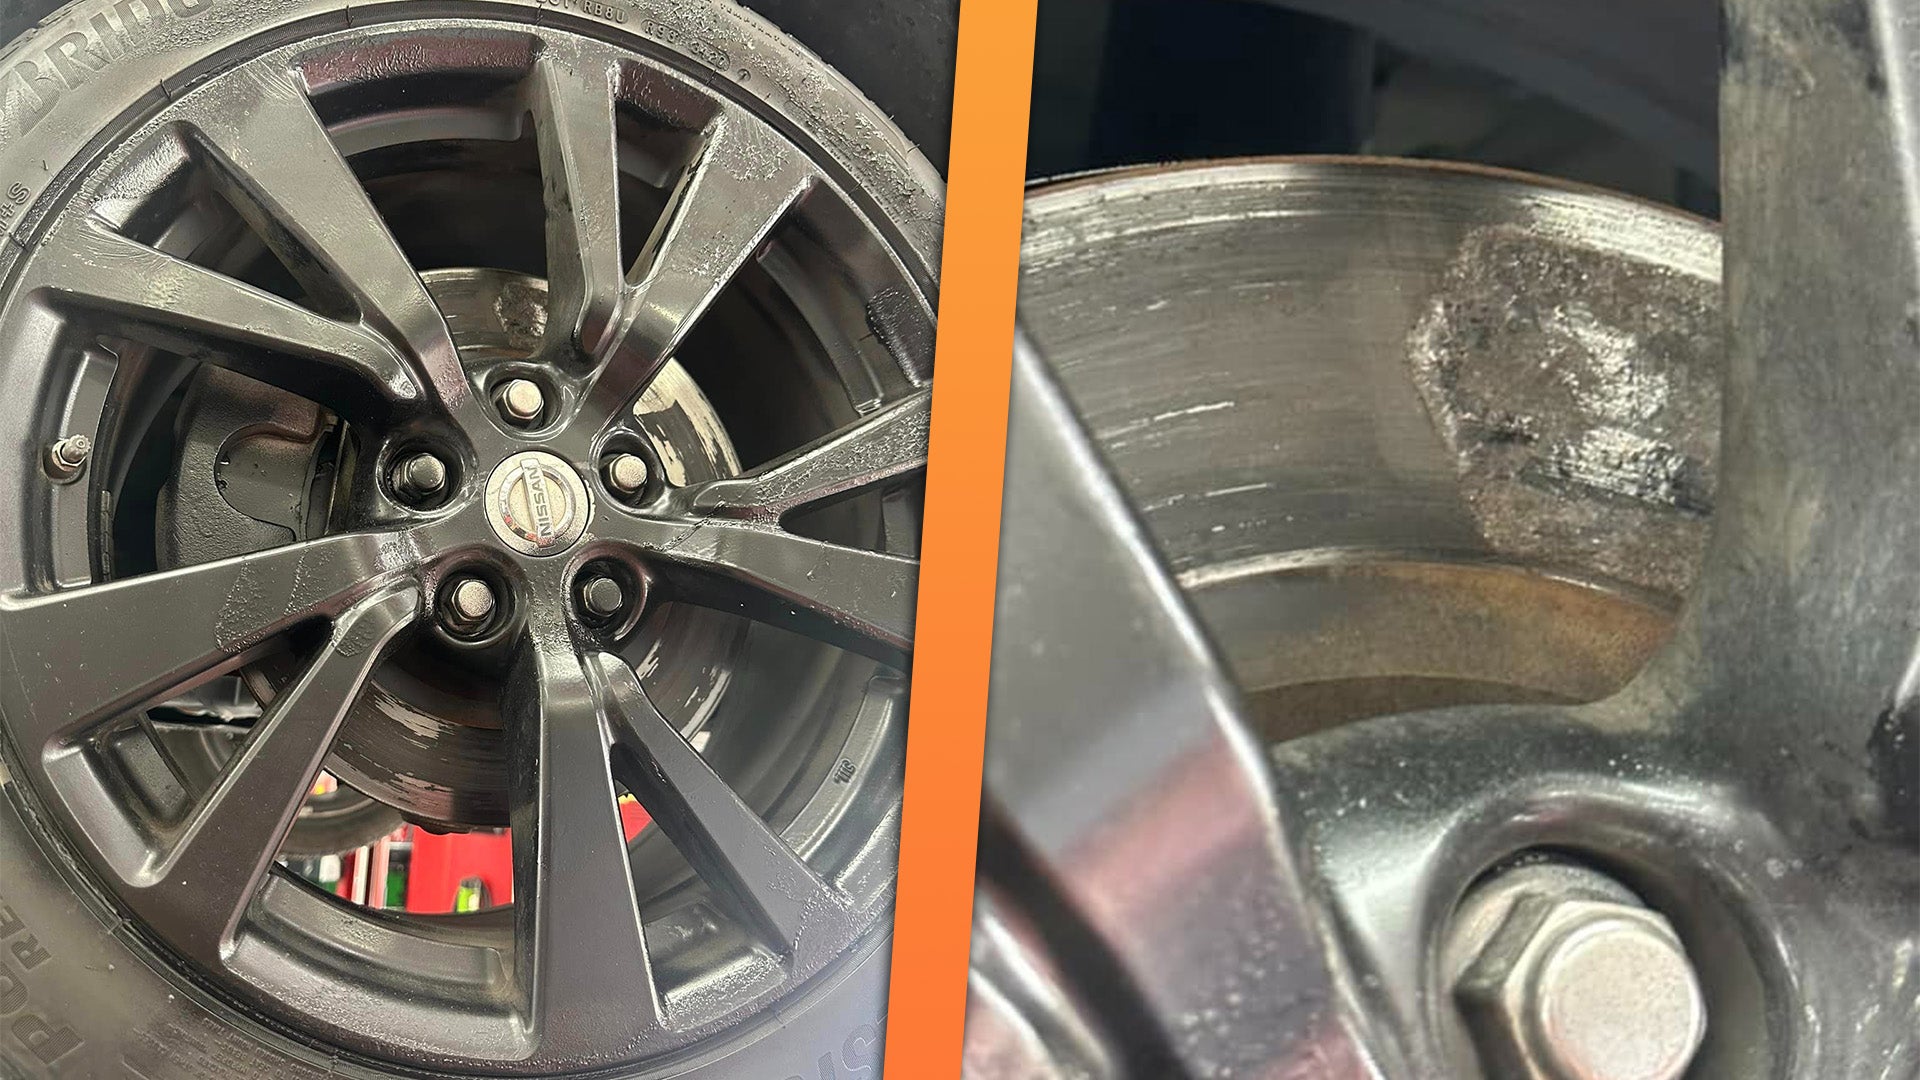 Nissan Owner Required Towing to a Shop After Painting Brake Rotors